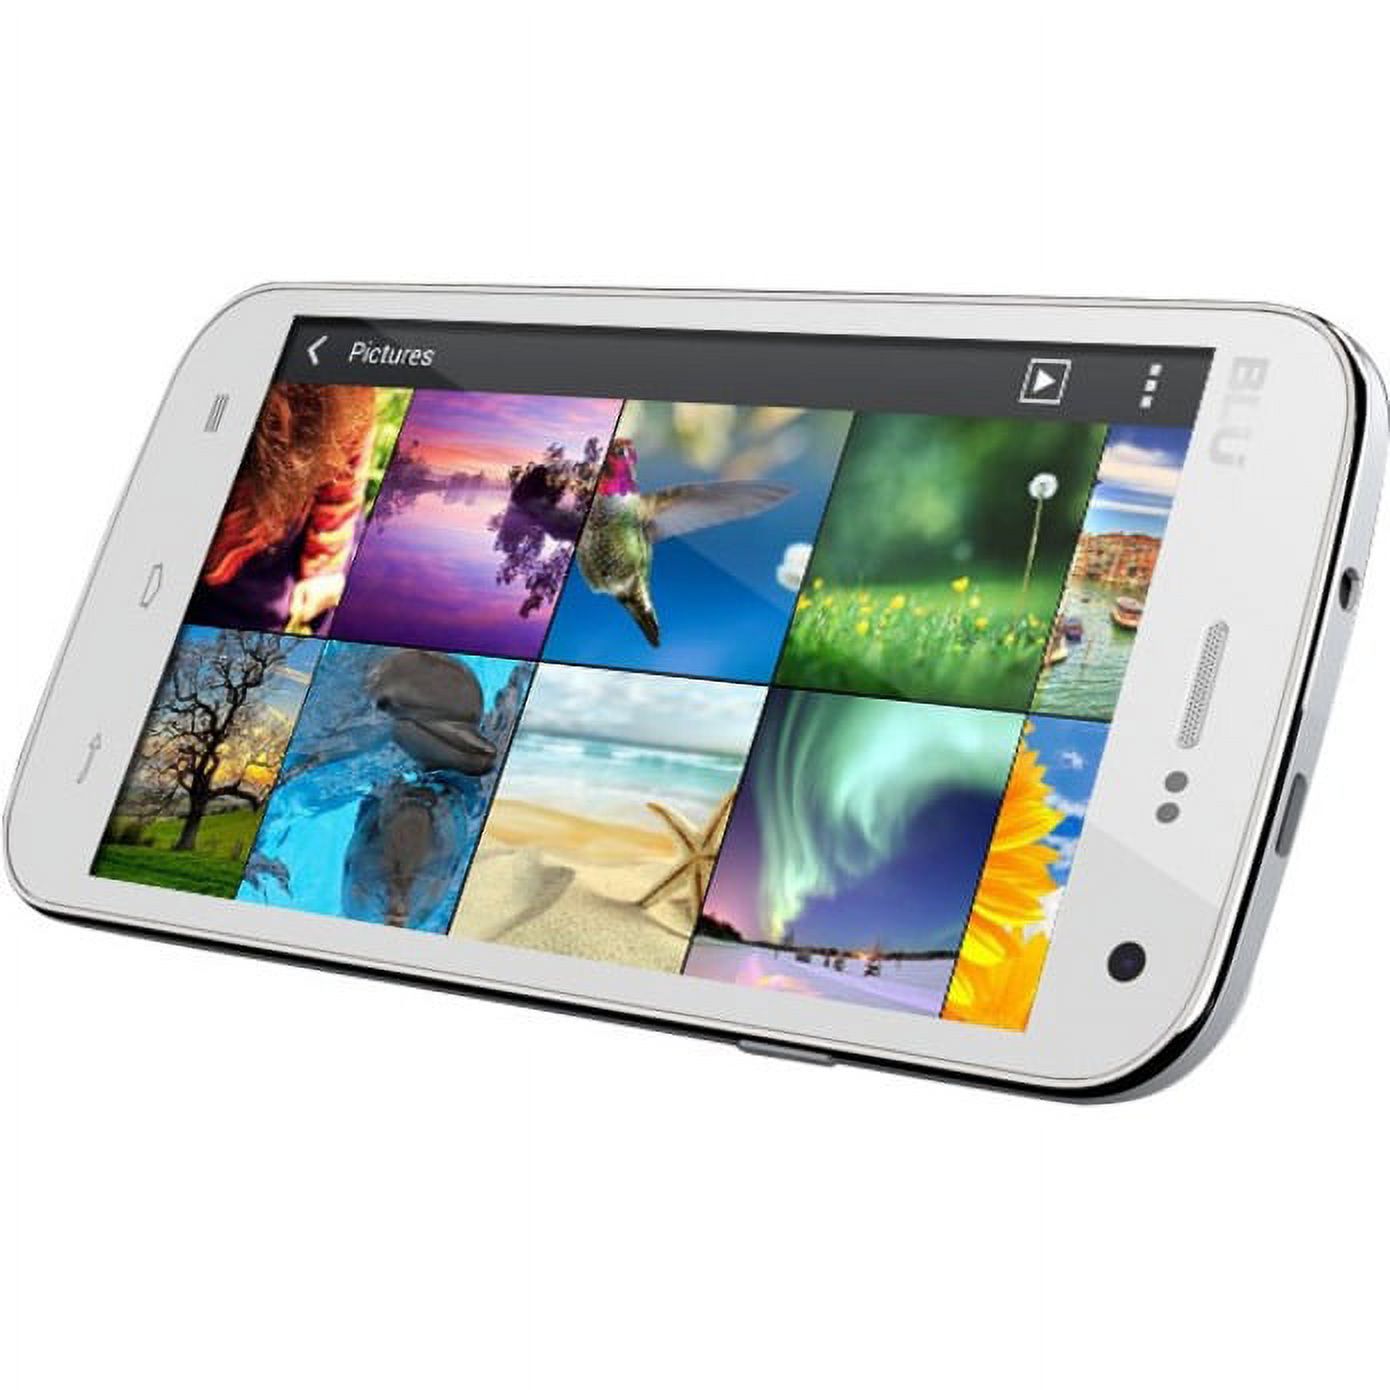 BLU Studio 5.0 II D532U 4 GB Smartphone, 5" LCD 480 x 854, Dual-core (2 Core) 1.30 GHz, 512 MB RAM, Android 4.2 Jelly Bean, 4G, White - image 3 of 4